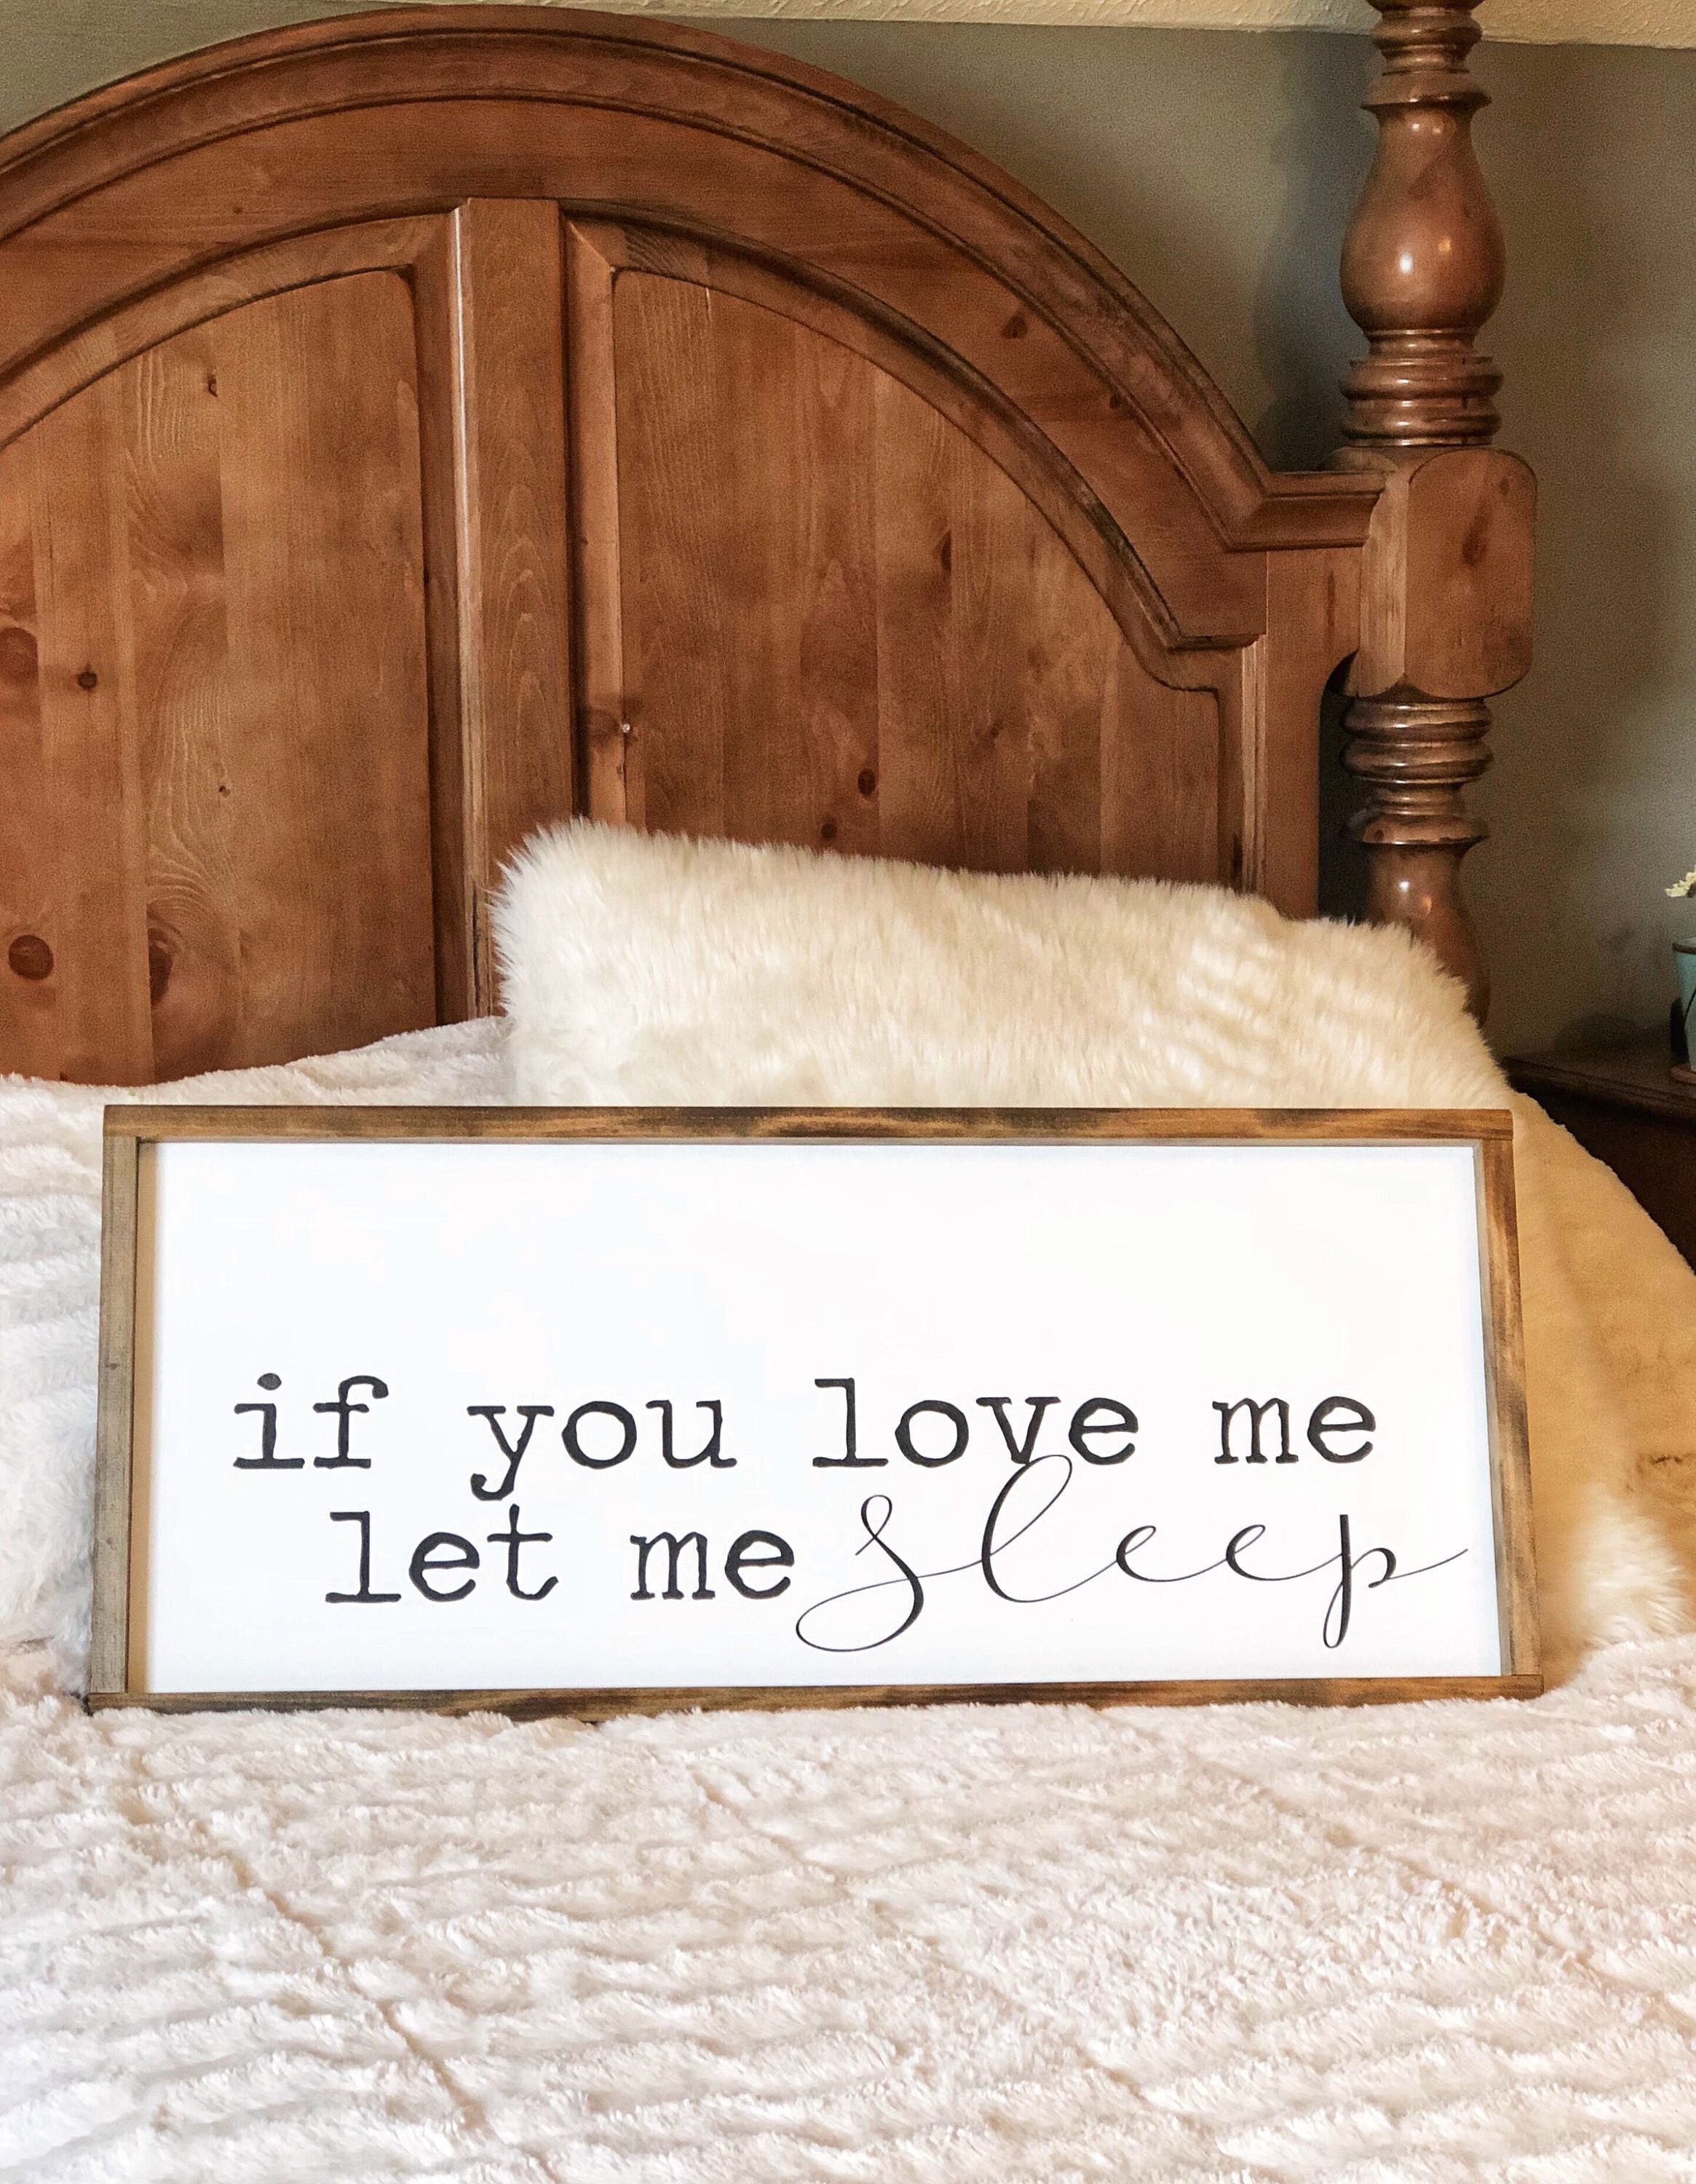 Farmhouse bedroom sign | above the bed sign | if you love me let me sleep sign -   16 diy projects Decoration bedrooms ideas